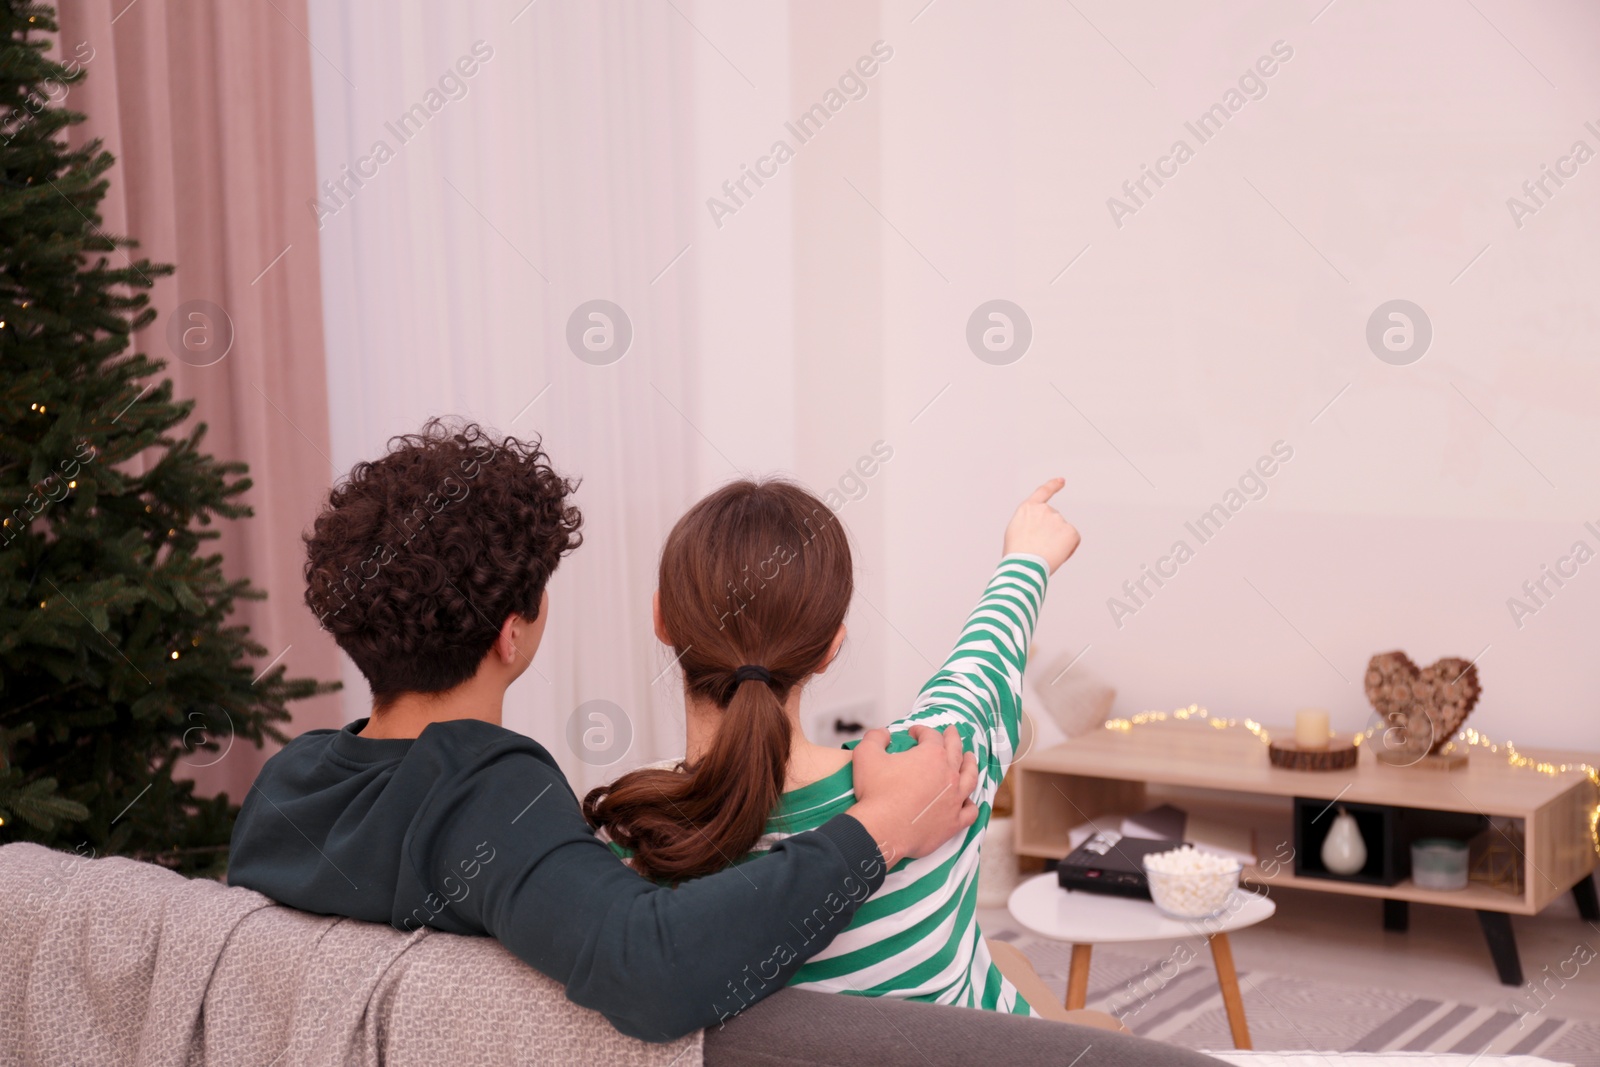 Photo of Couple watching movie via video projector at home